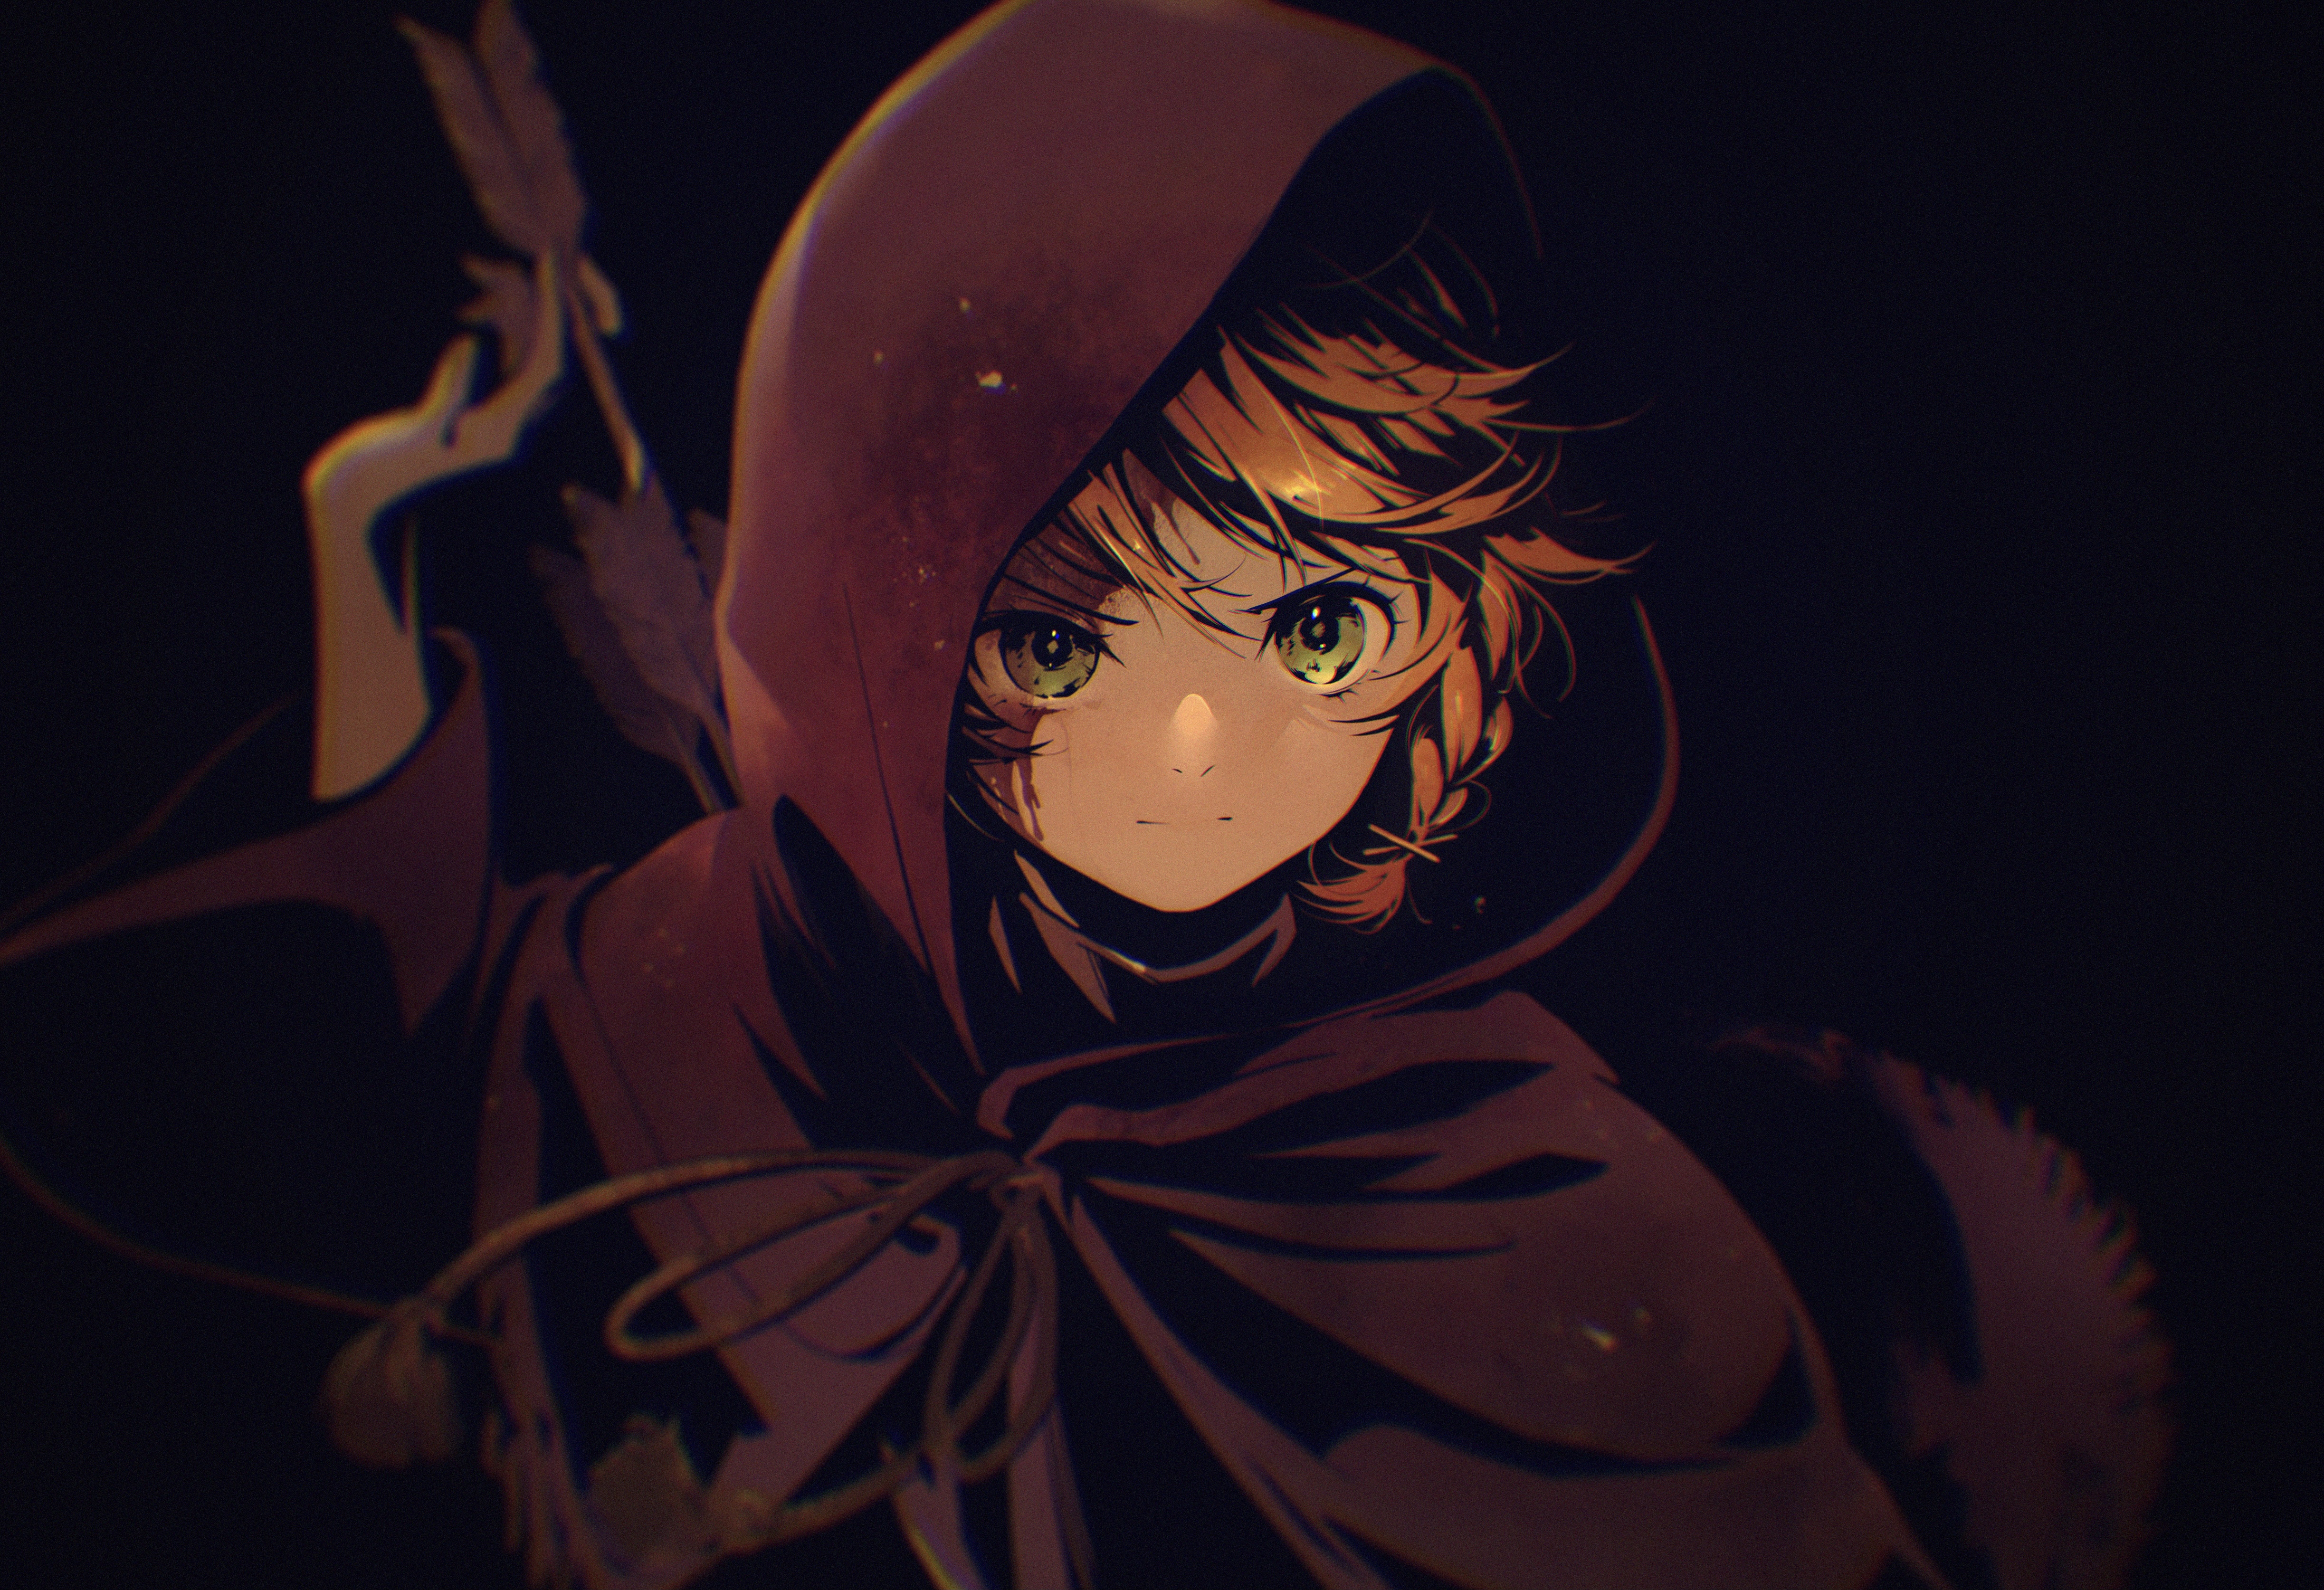 Anime 4892x3347 anime anime girls cape green eyes redhead bow scars arrows black background short hair Emma (The Promised Neverland) The Promised Neverland